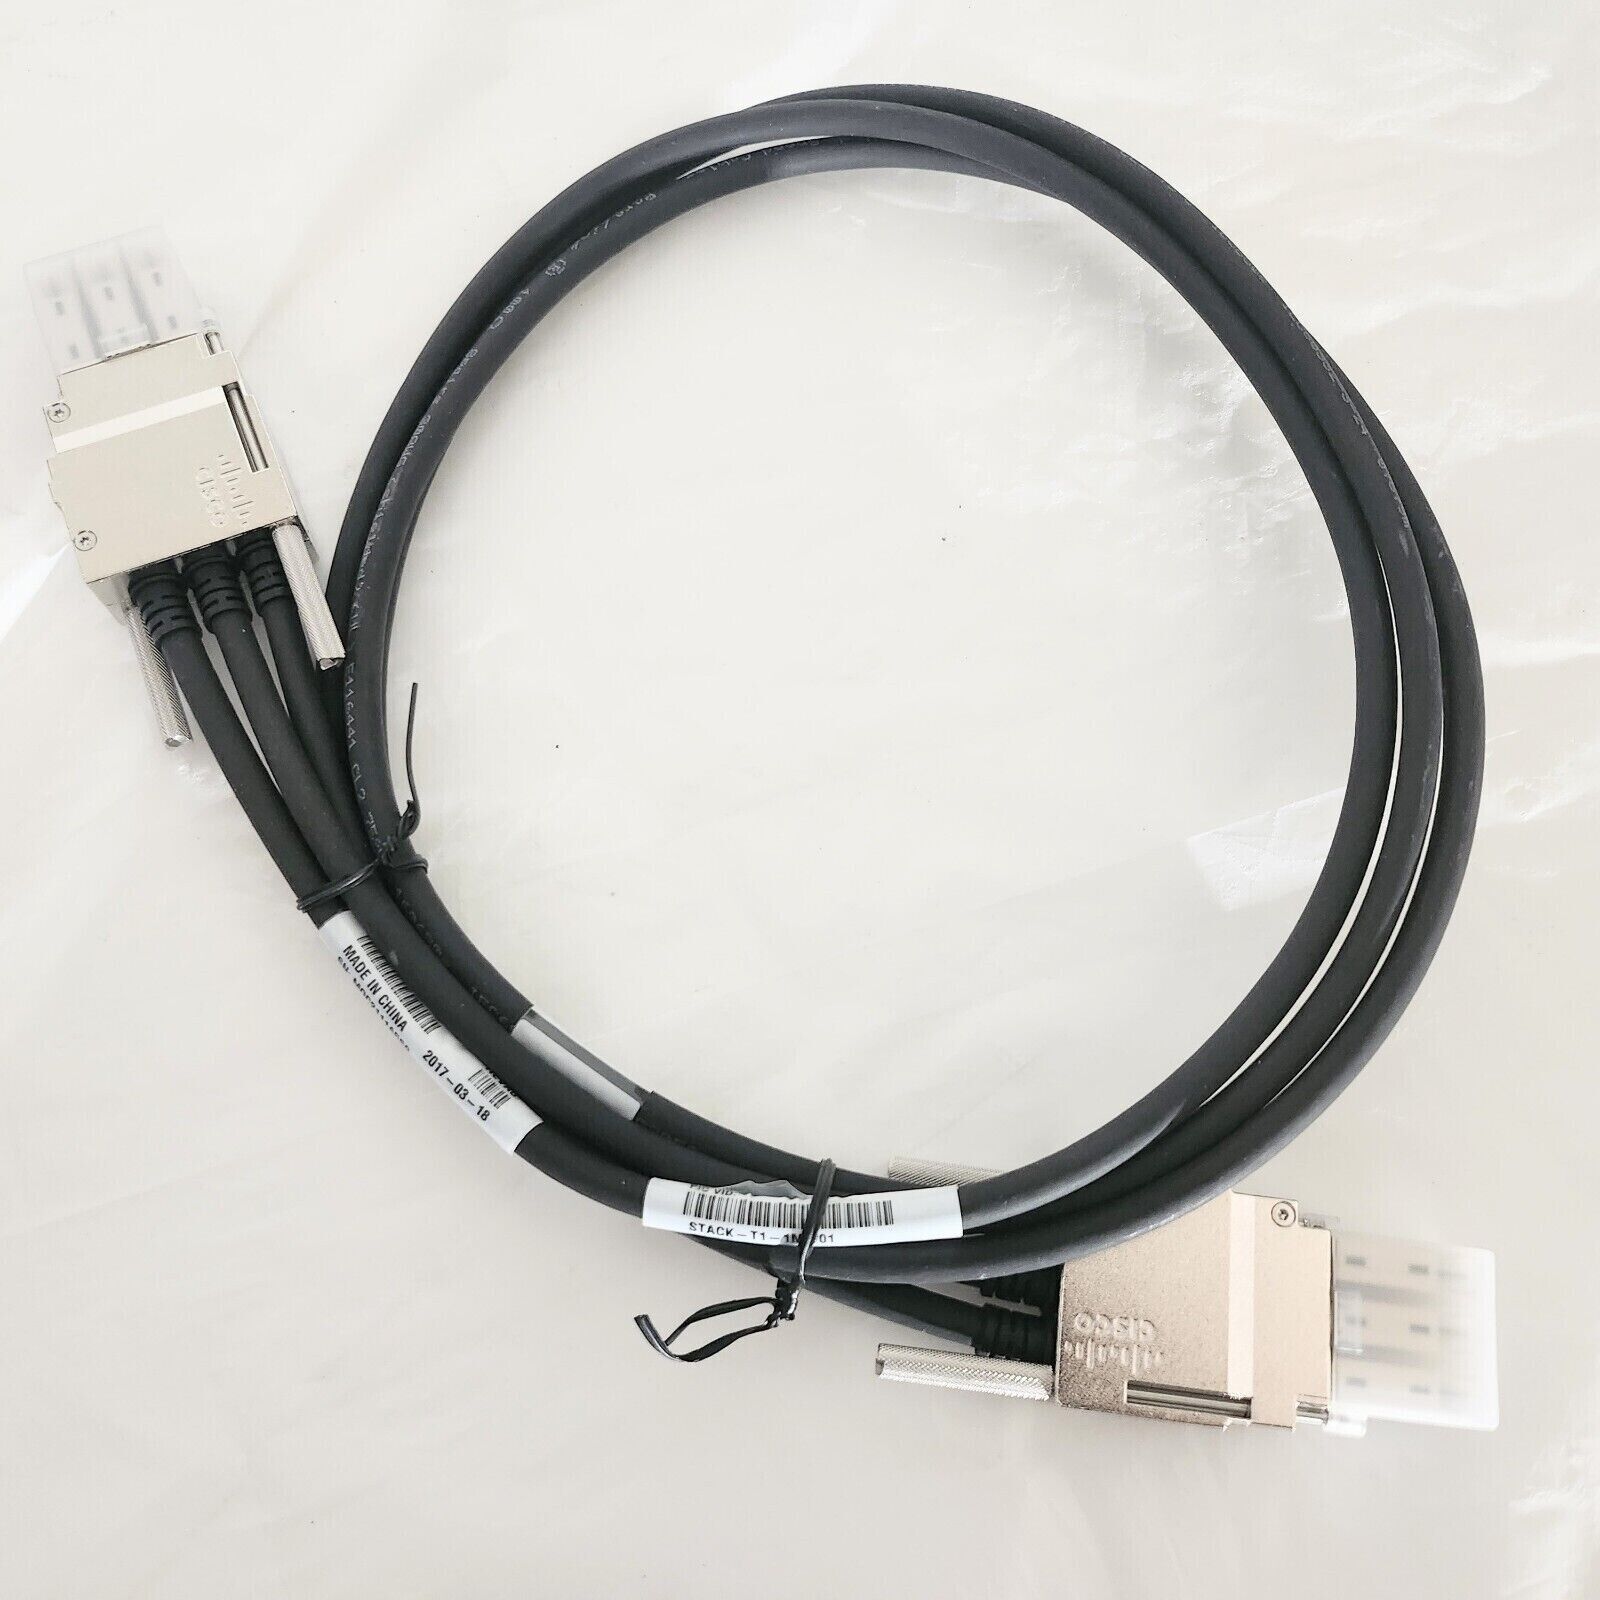 Cisco STACK-T1-1M  StackWise 1M Stacking Cable 800-40404-01